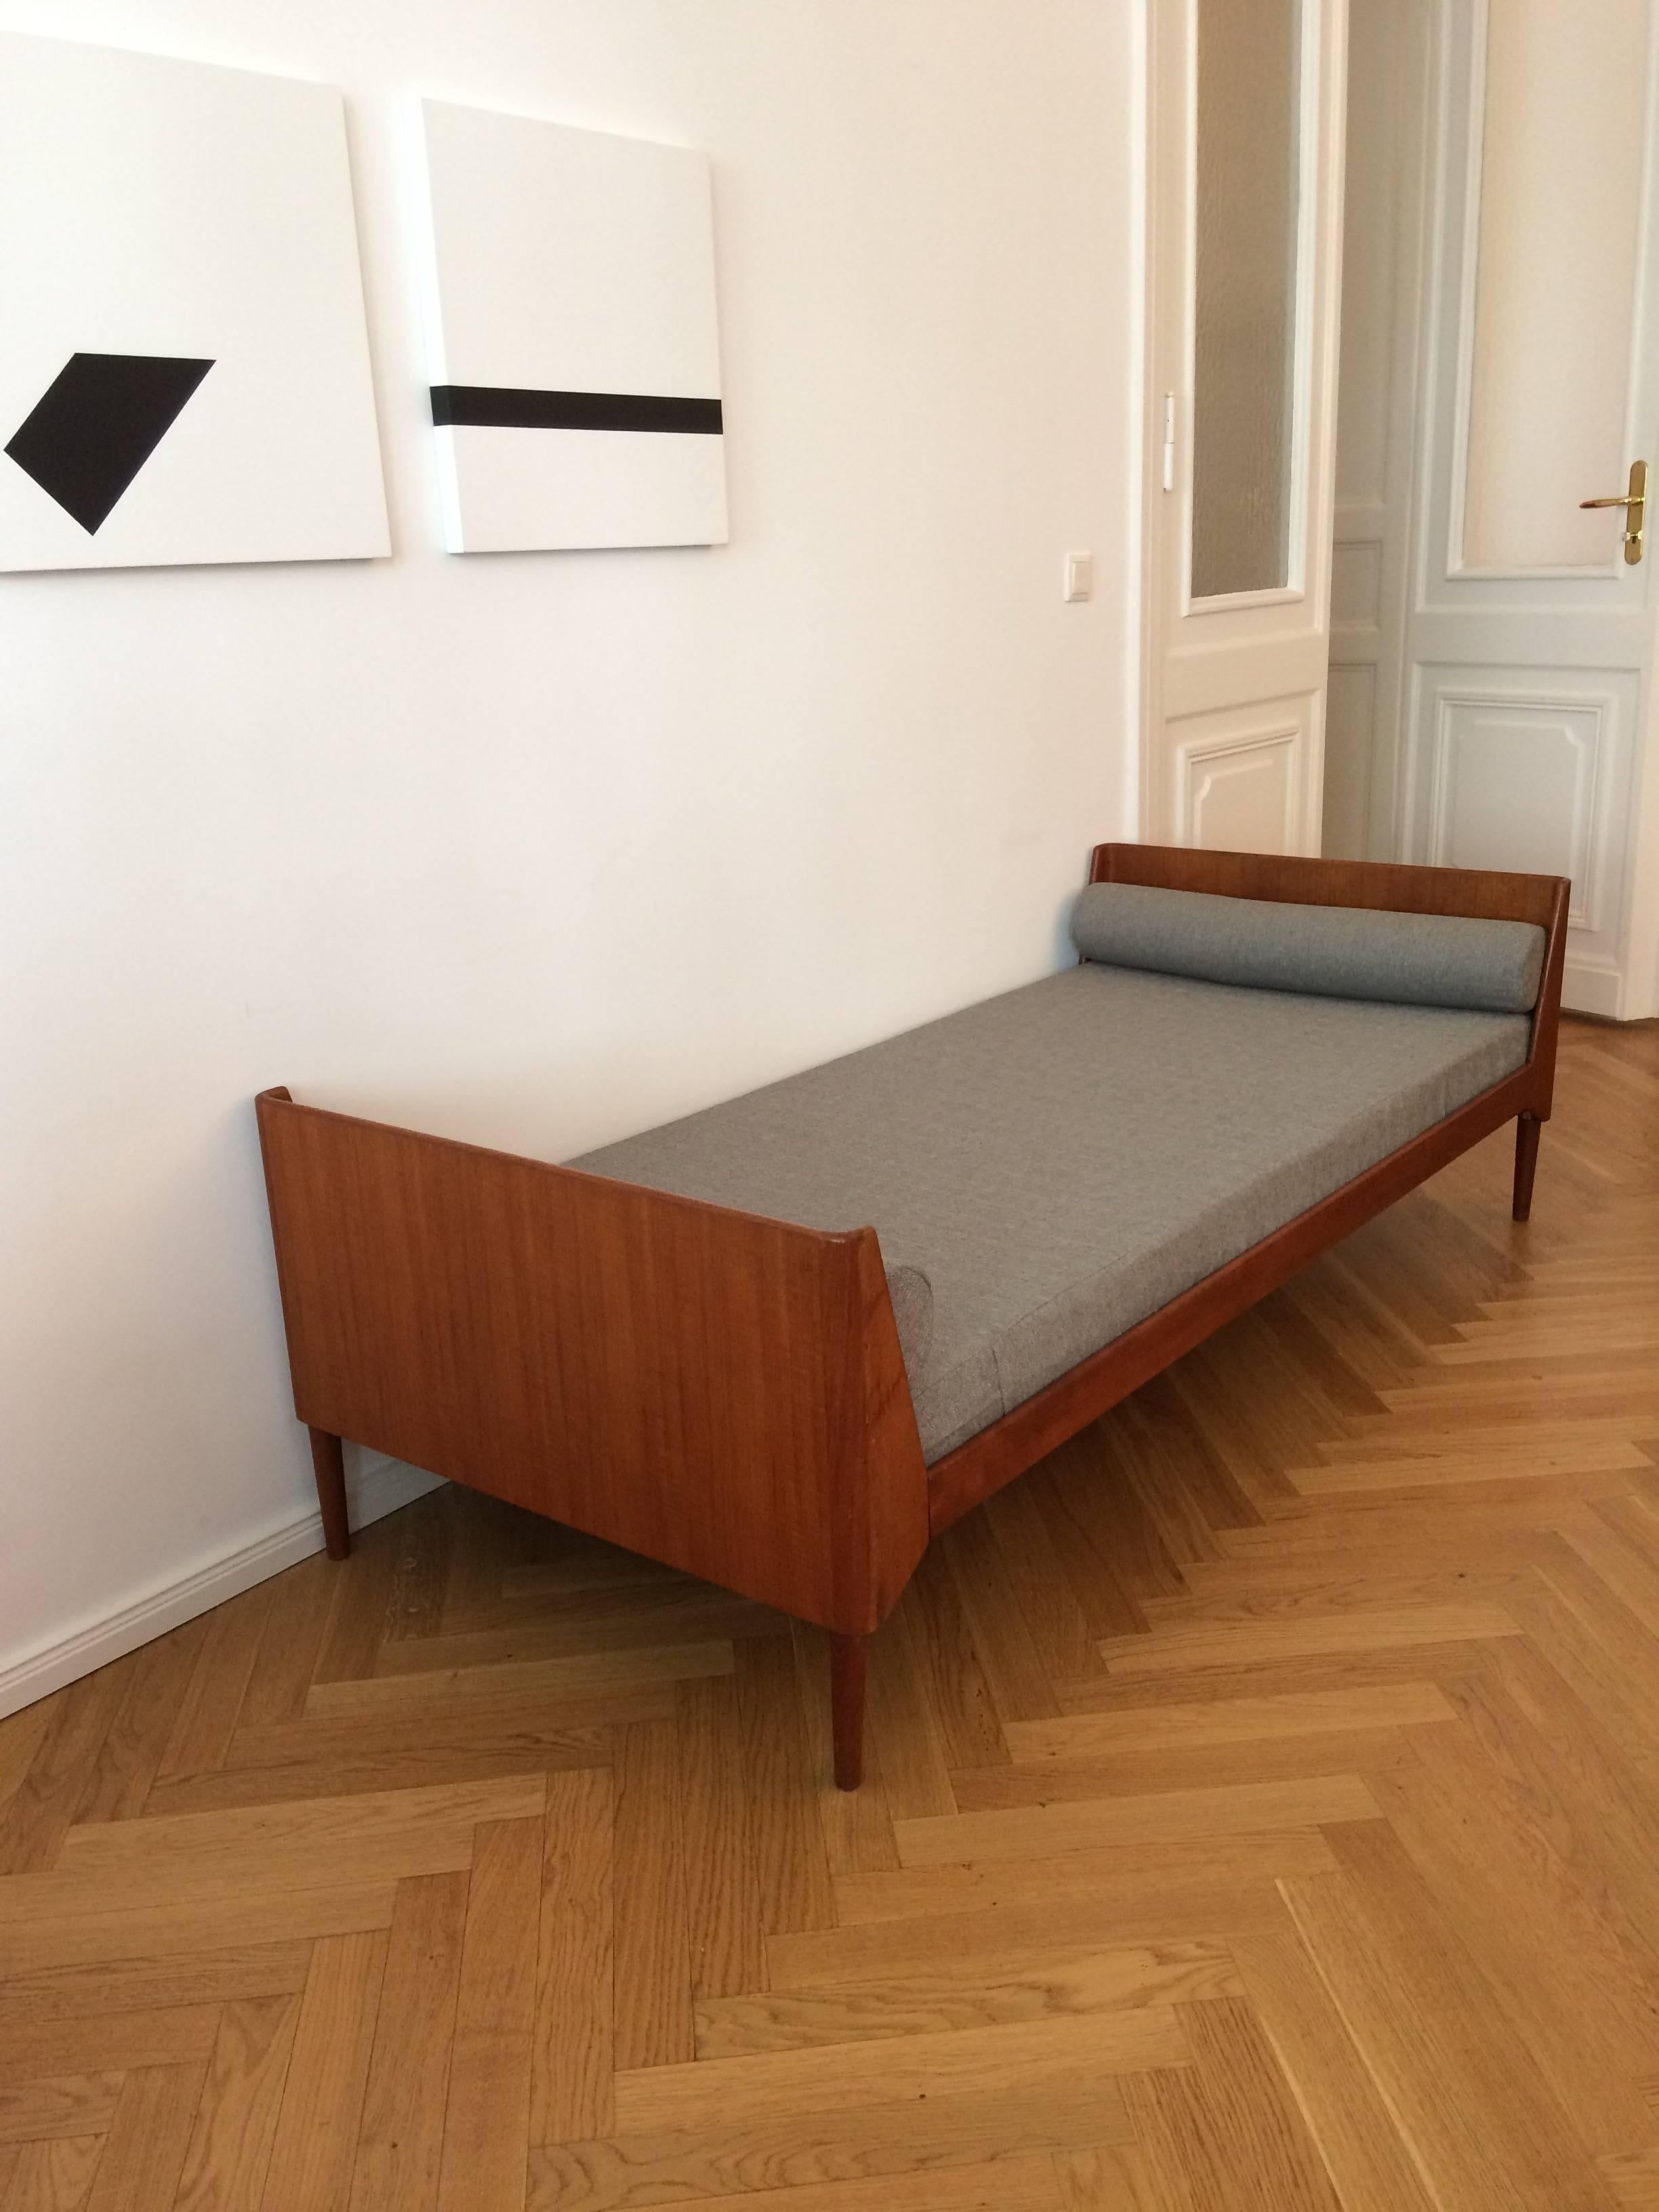 A very stylish daybed in Danish Mid Century design from the 1960s, made of solid teak wood. It features round edges and comes in original lath floor and a brand new upholstery in grey. Measurements of mattress is approximately 190 x 84 x 10 cm.